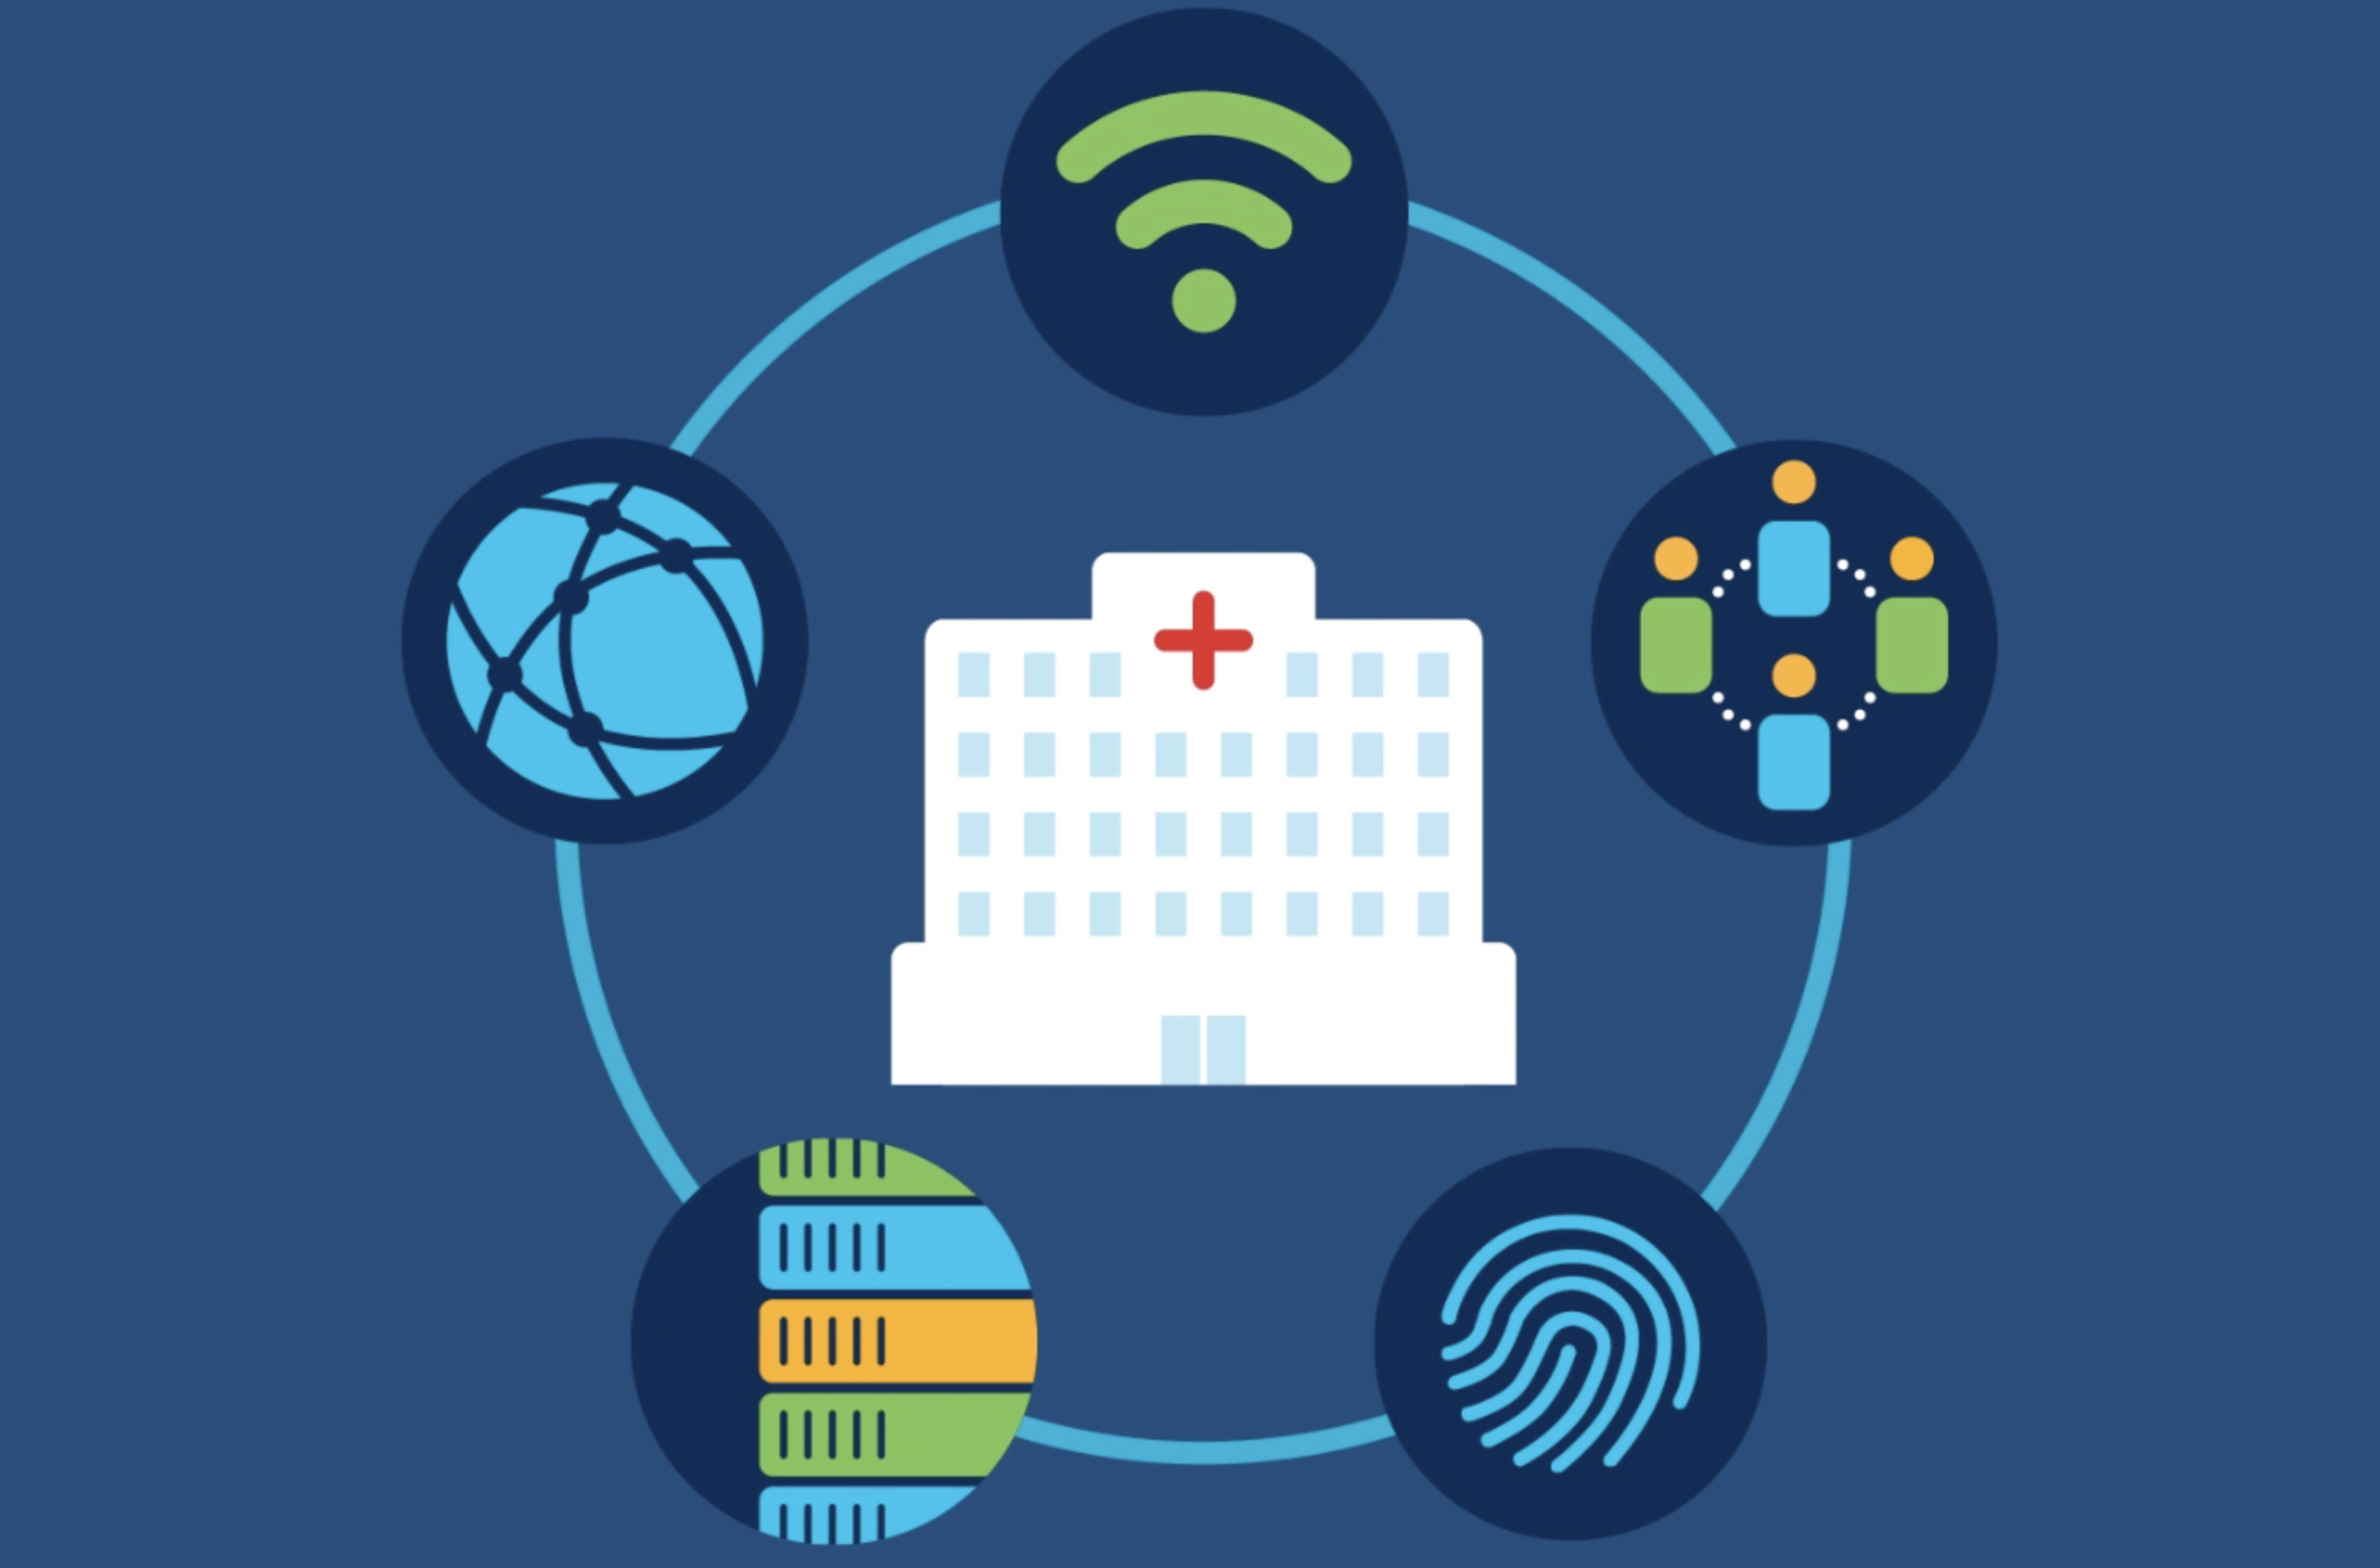 The future of healthcare is connected